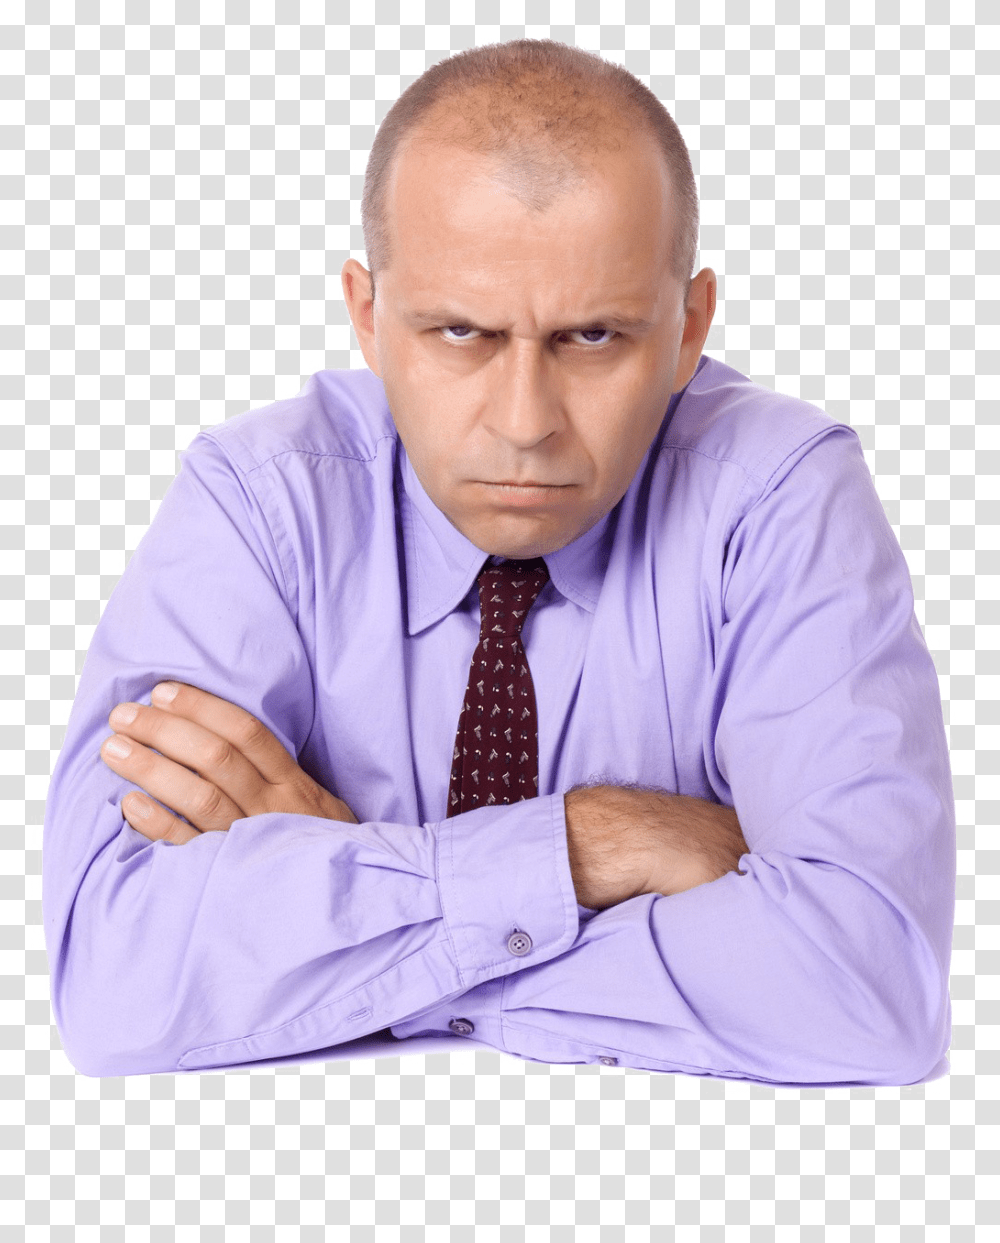 Anger Image Emotion Portable Network Graphics Person Angry Angry Man, Tie, Accessories, Accessory, Shirt Transparent Png